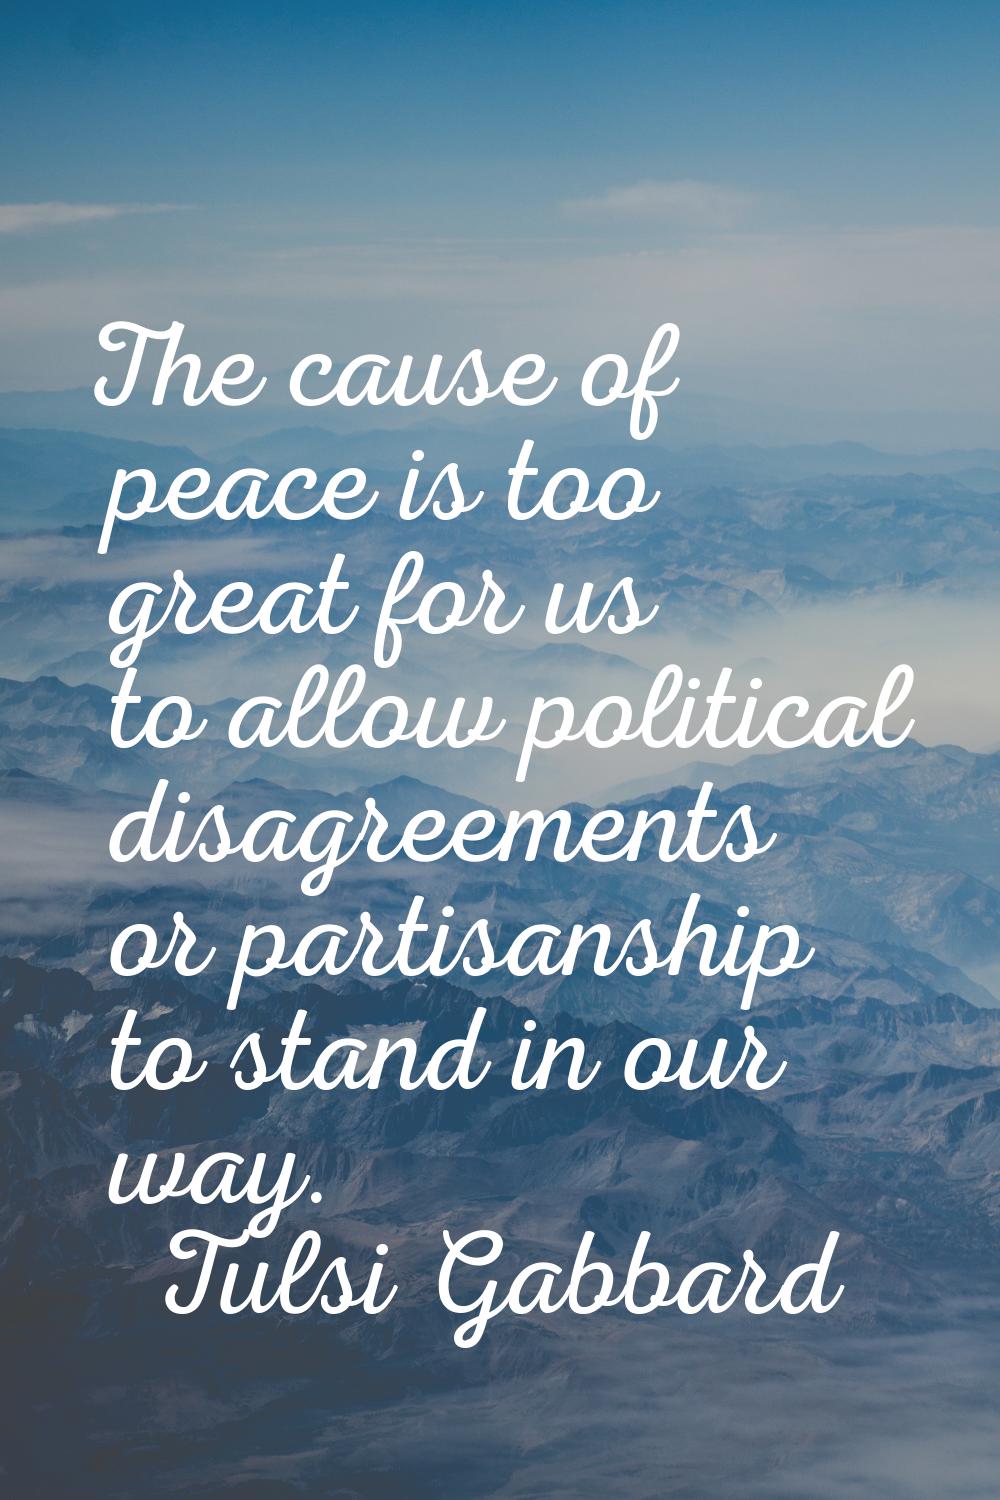 The cause of peace is too great for us to allow political disagreements or partisanship to stand in